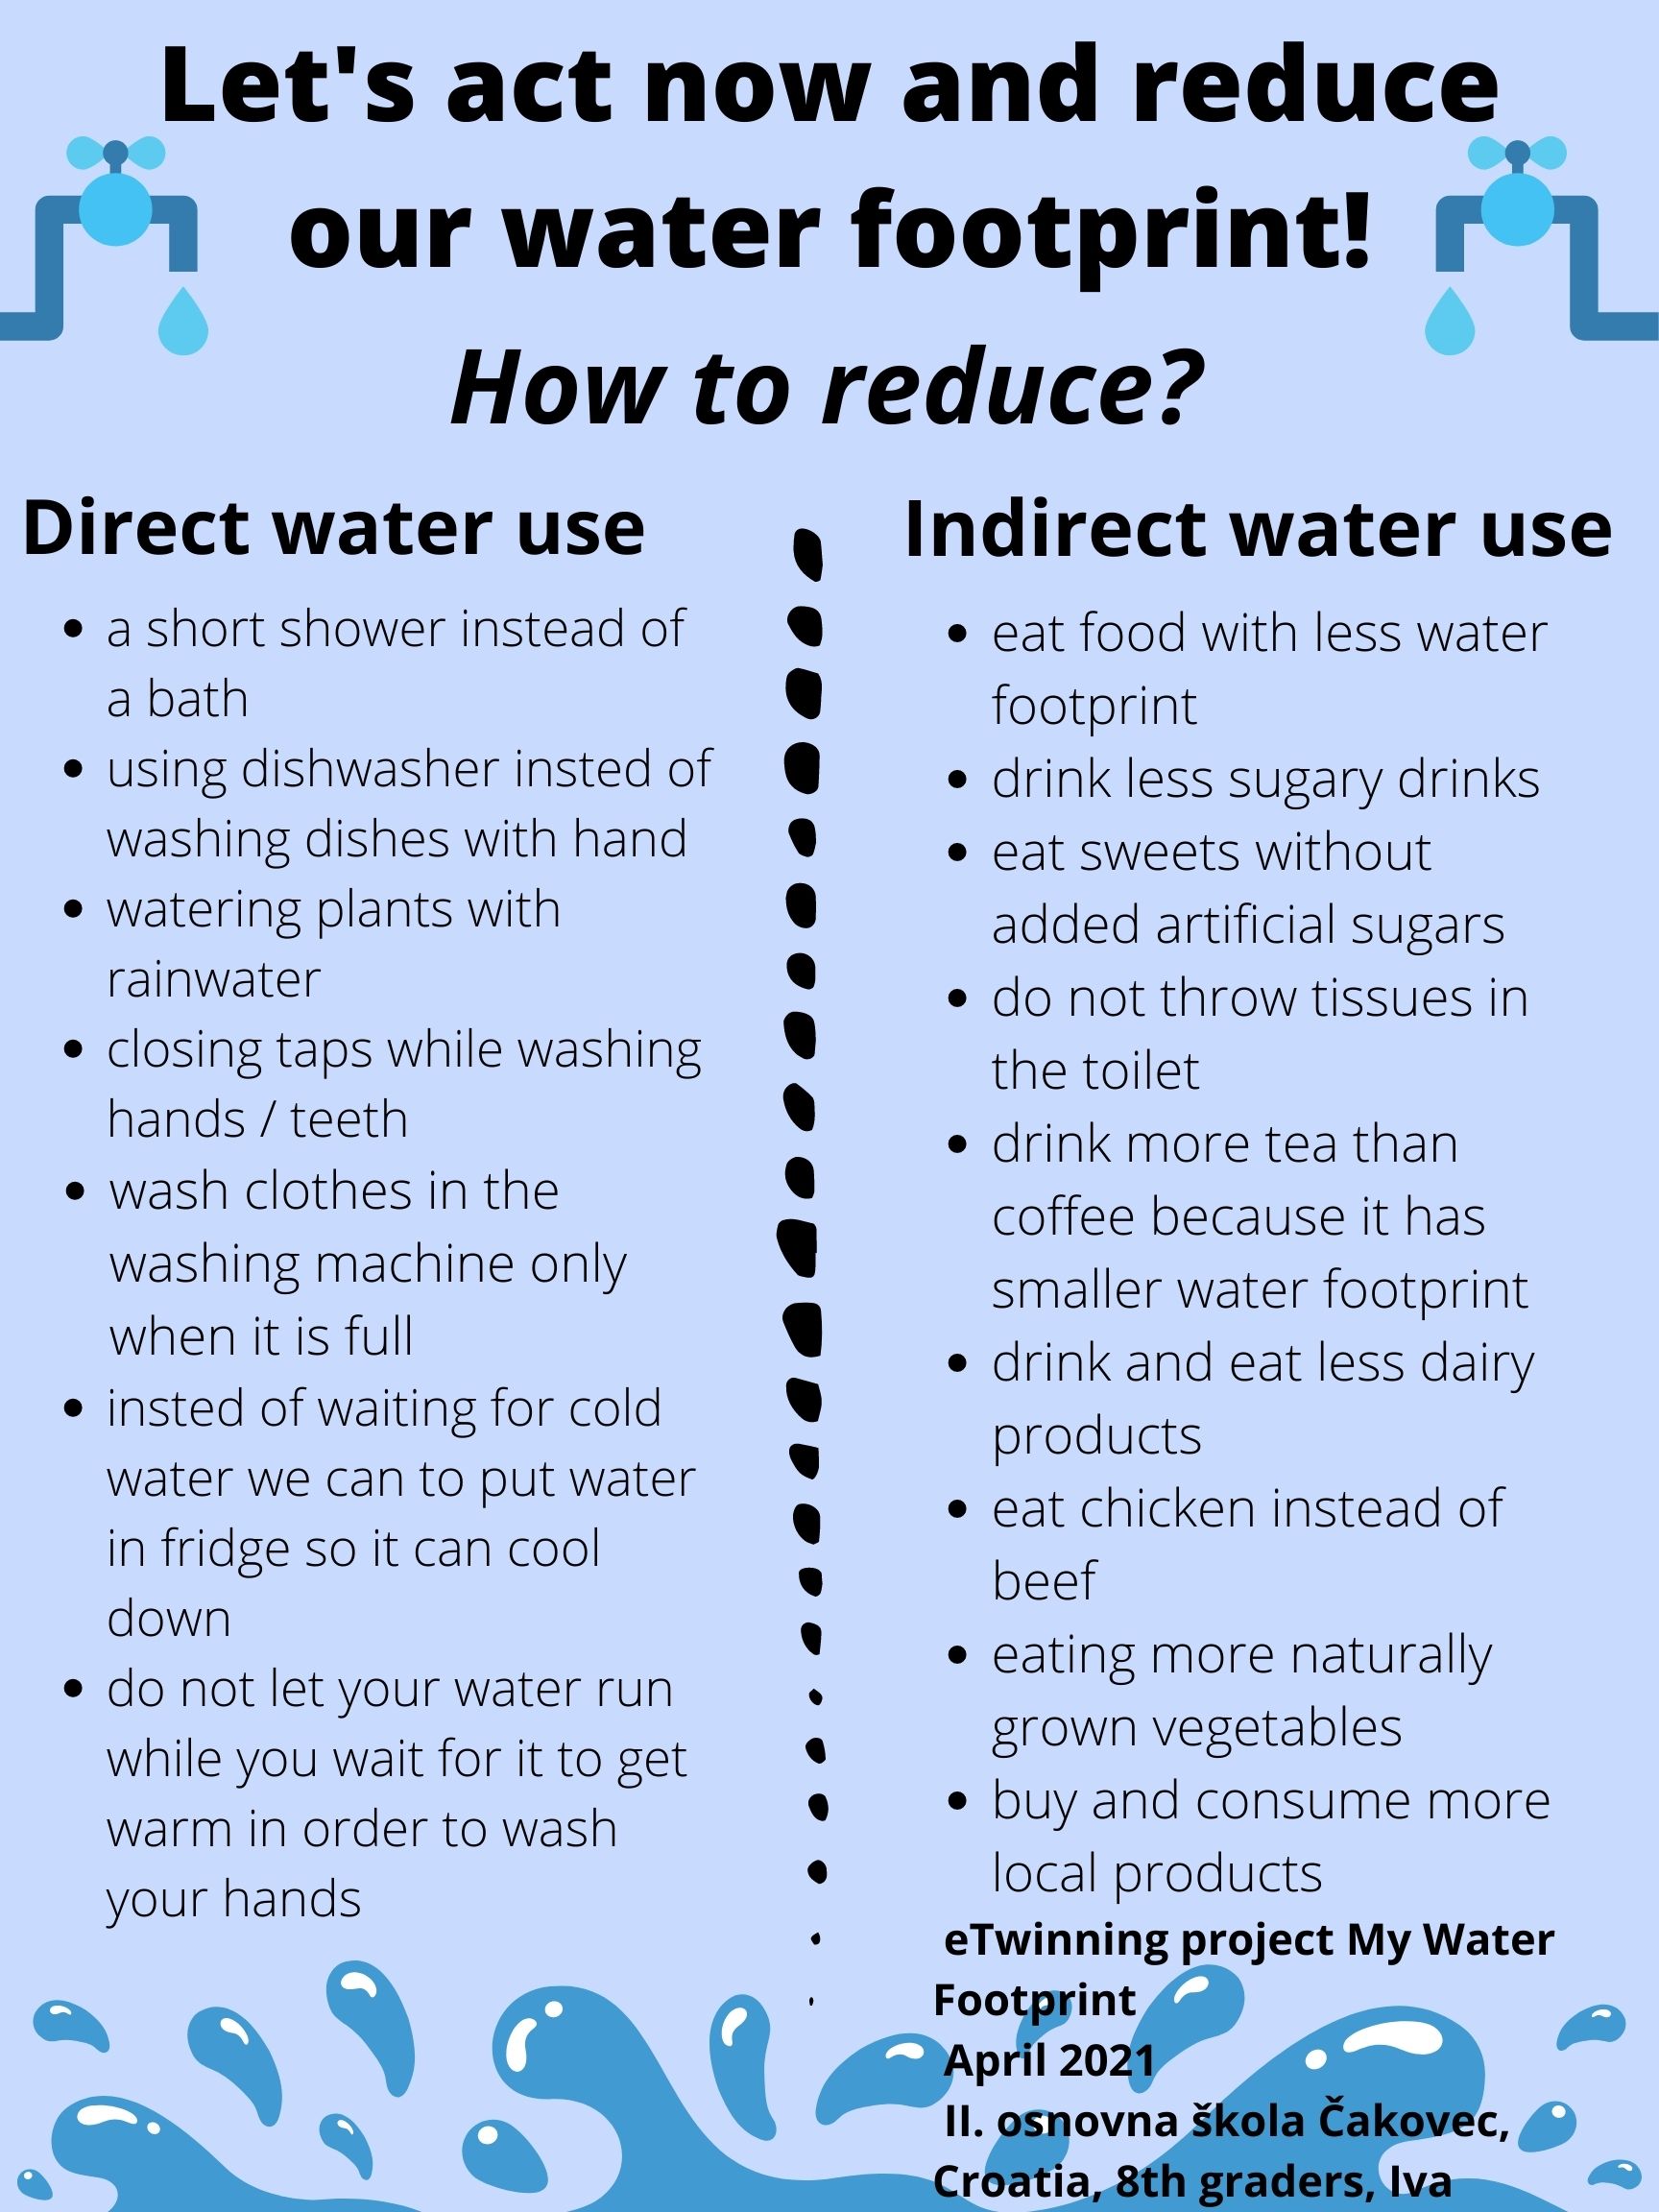 Let's act now and reduce our water footprint